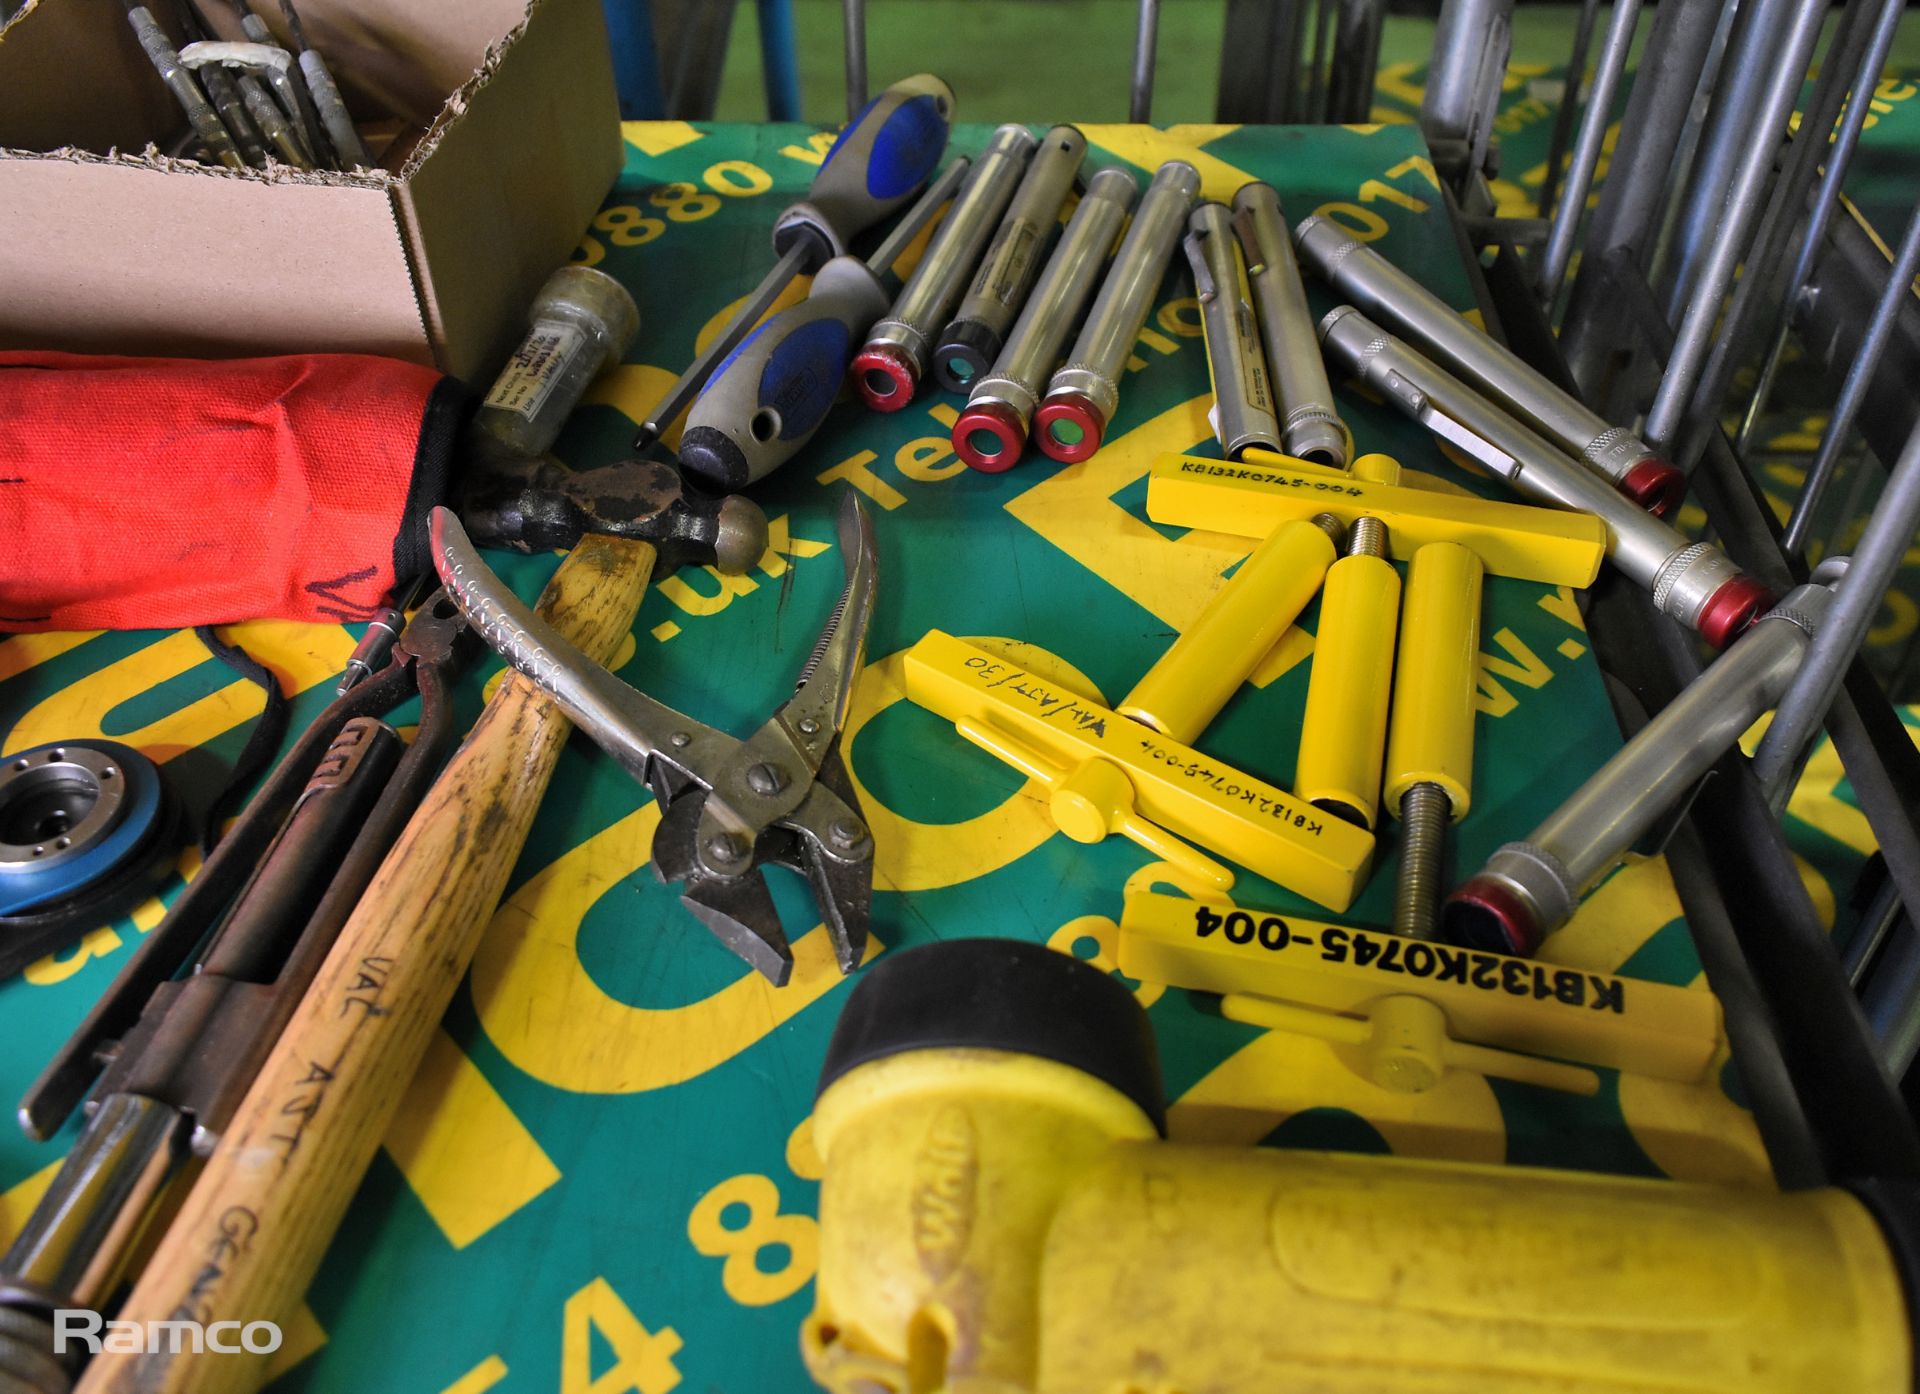 Workshop Tools - torches, picks, wire strippers, depth gauges, trim removal tools, air line splitter - Image 9 of 10